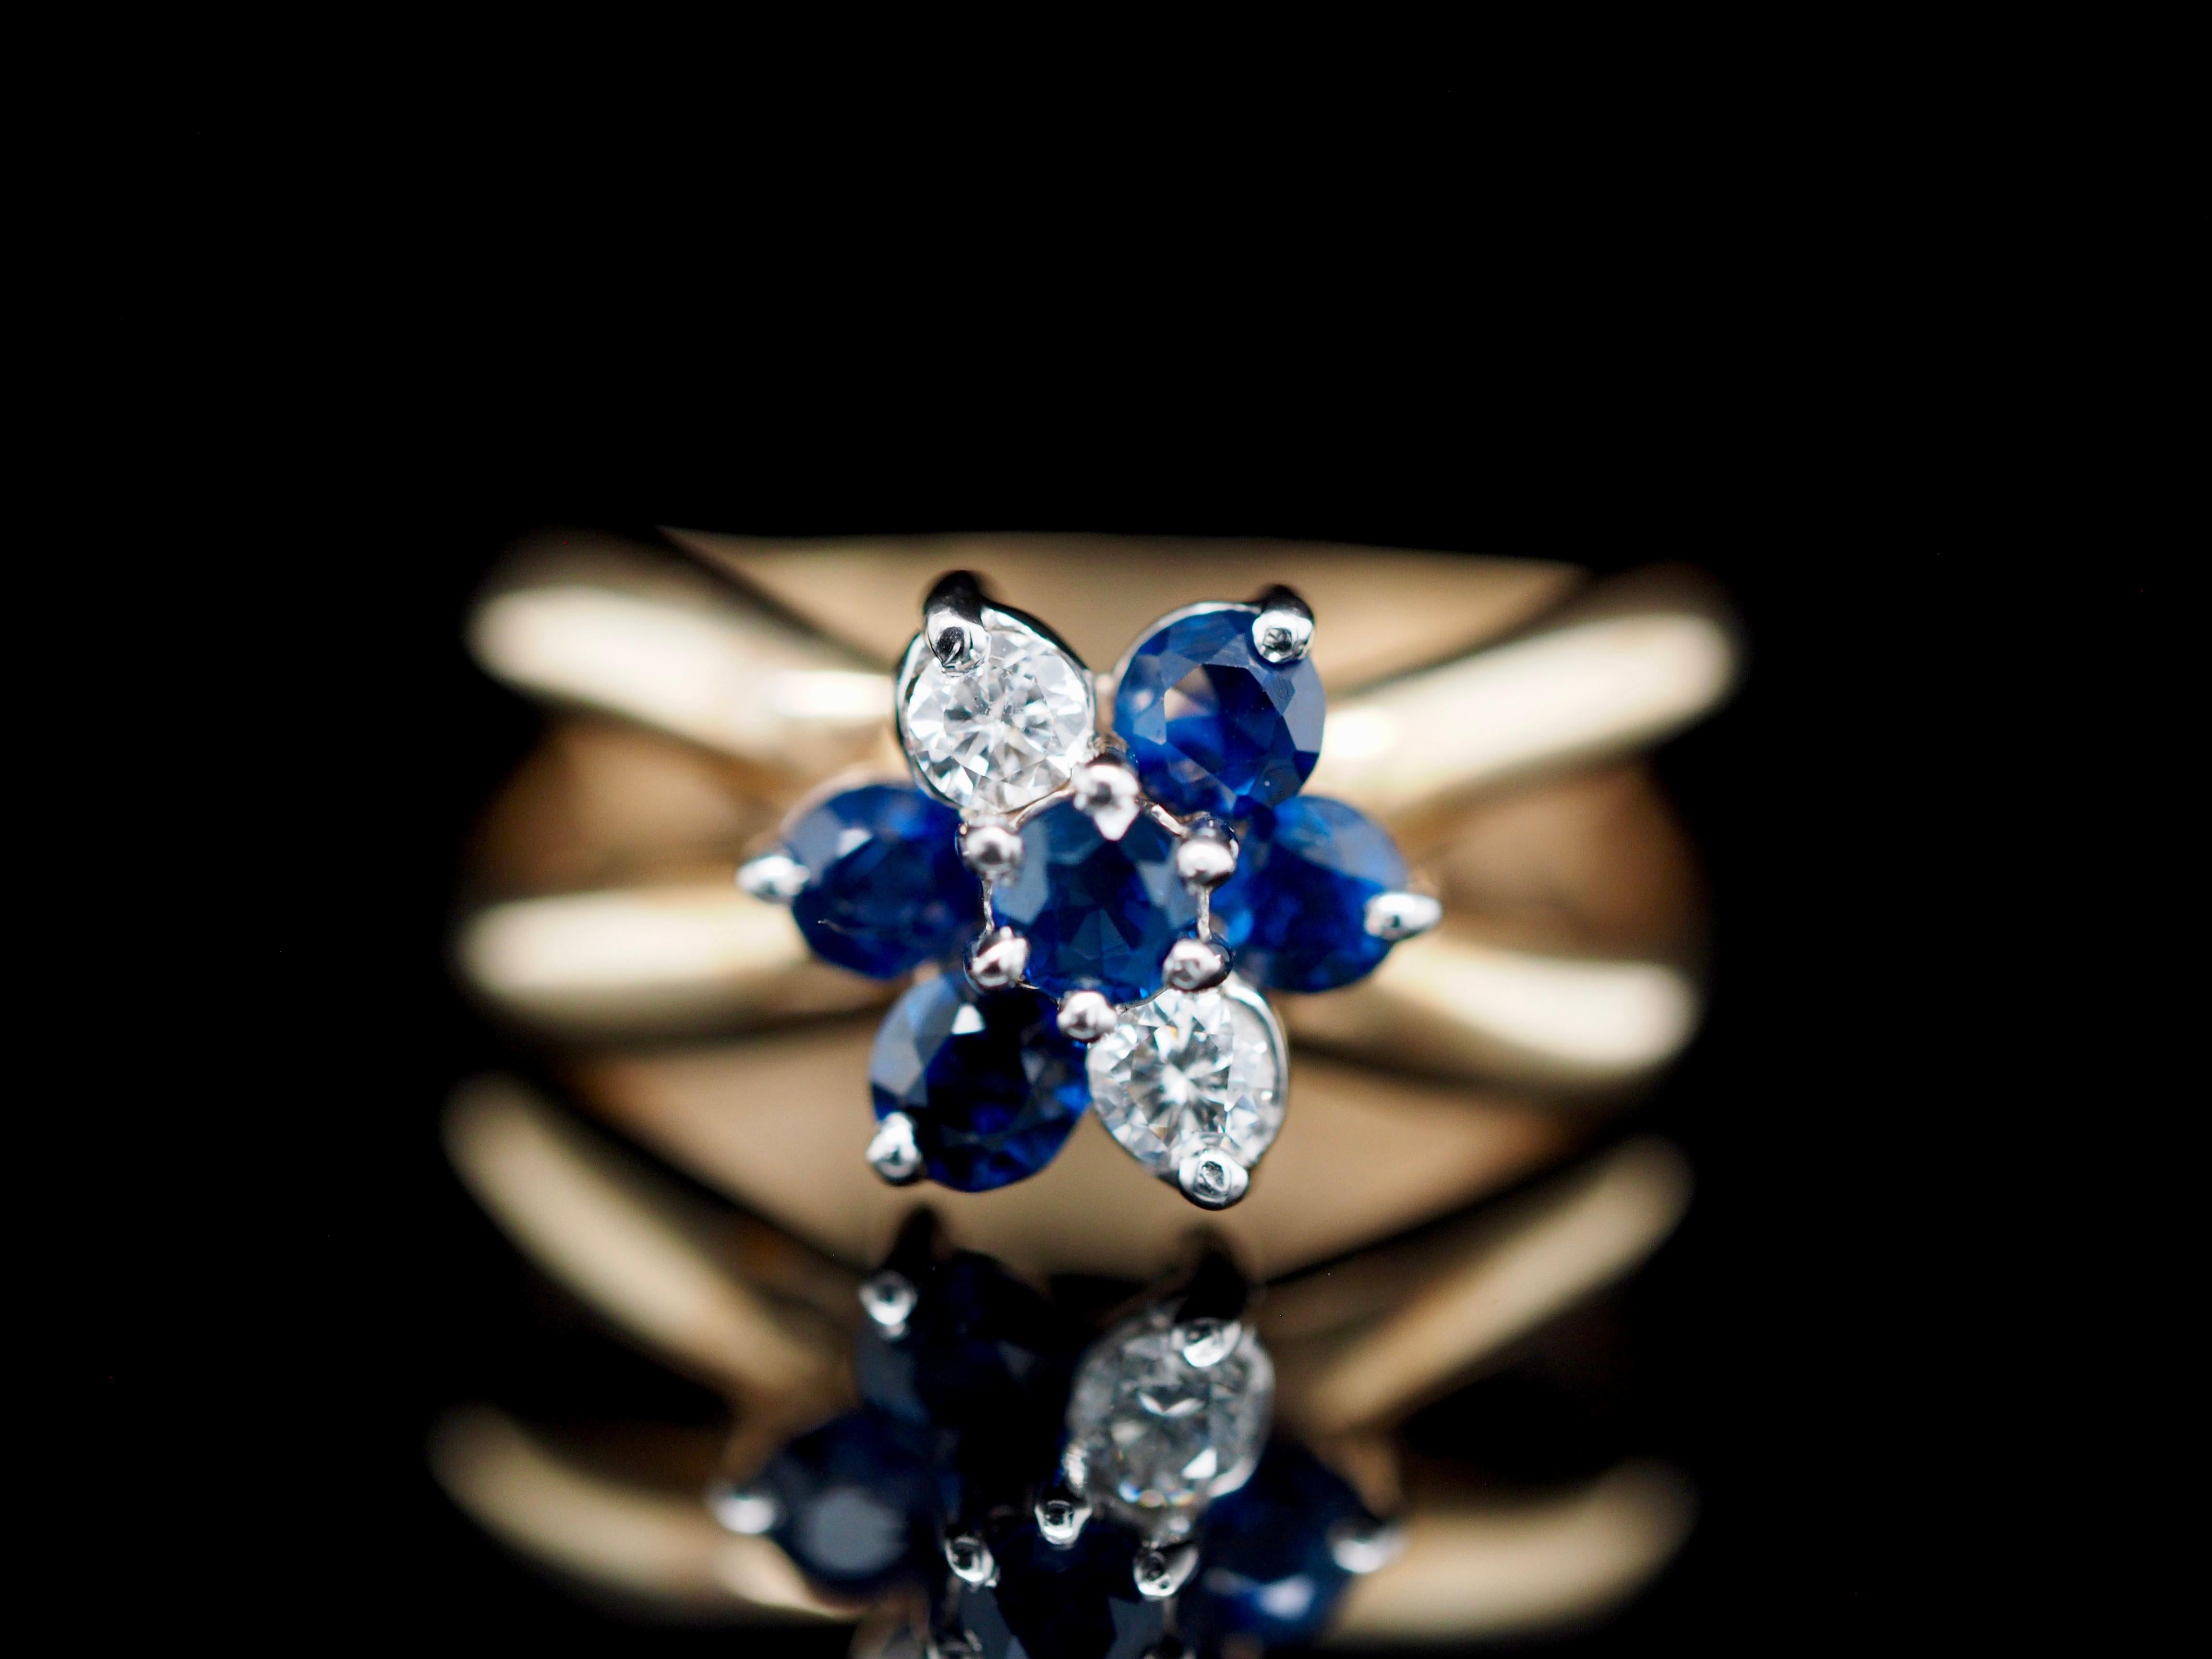 This stunning diamond and sapphire ring makes the perfect statement. Its royal blue sapphires and touch of round brilliant diamonds gives the perfect pop of sparkle! The timeless flower halo design makes the perfect treat to yourself or will make